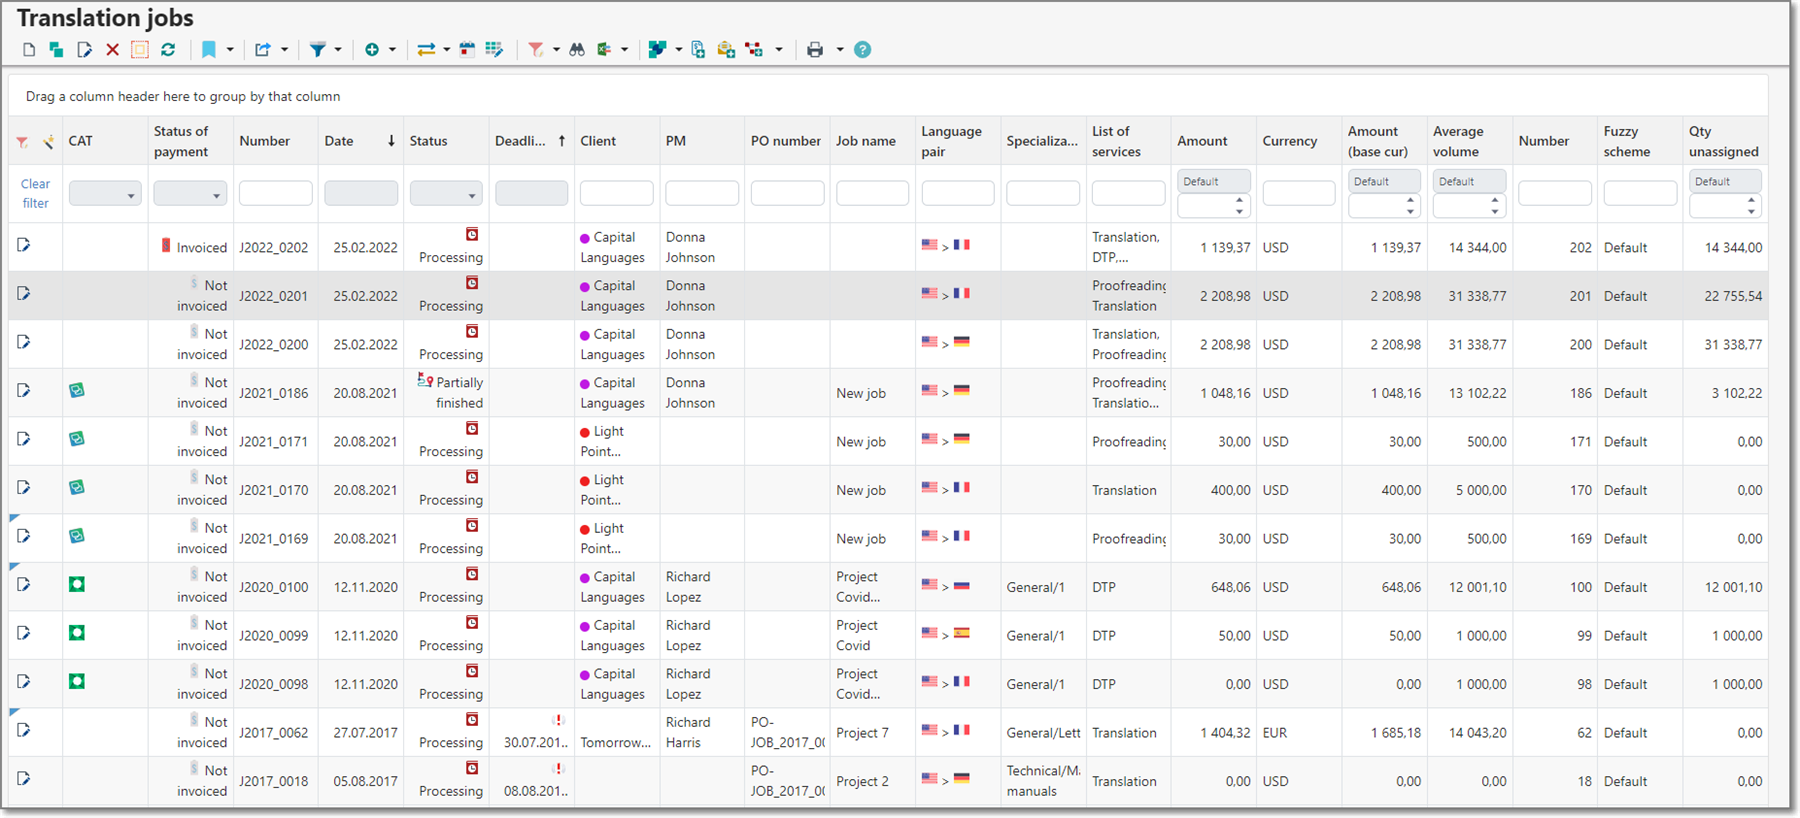 Screenshot of Trados Studio Translation jobs window showing a list of jobs with various statuses such as 'Processing', 'Partially finished', and 'Not invoiced'. Some entries have warning icons indicating issues.